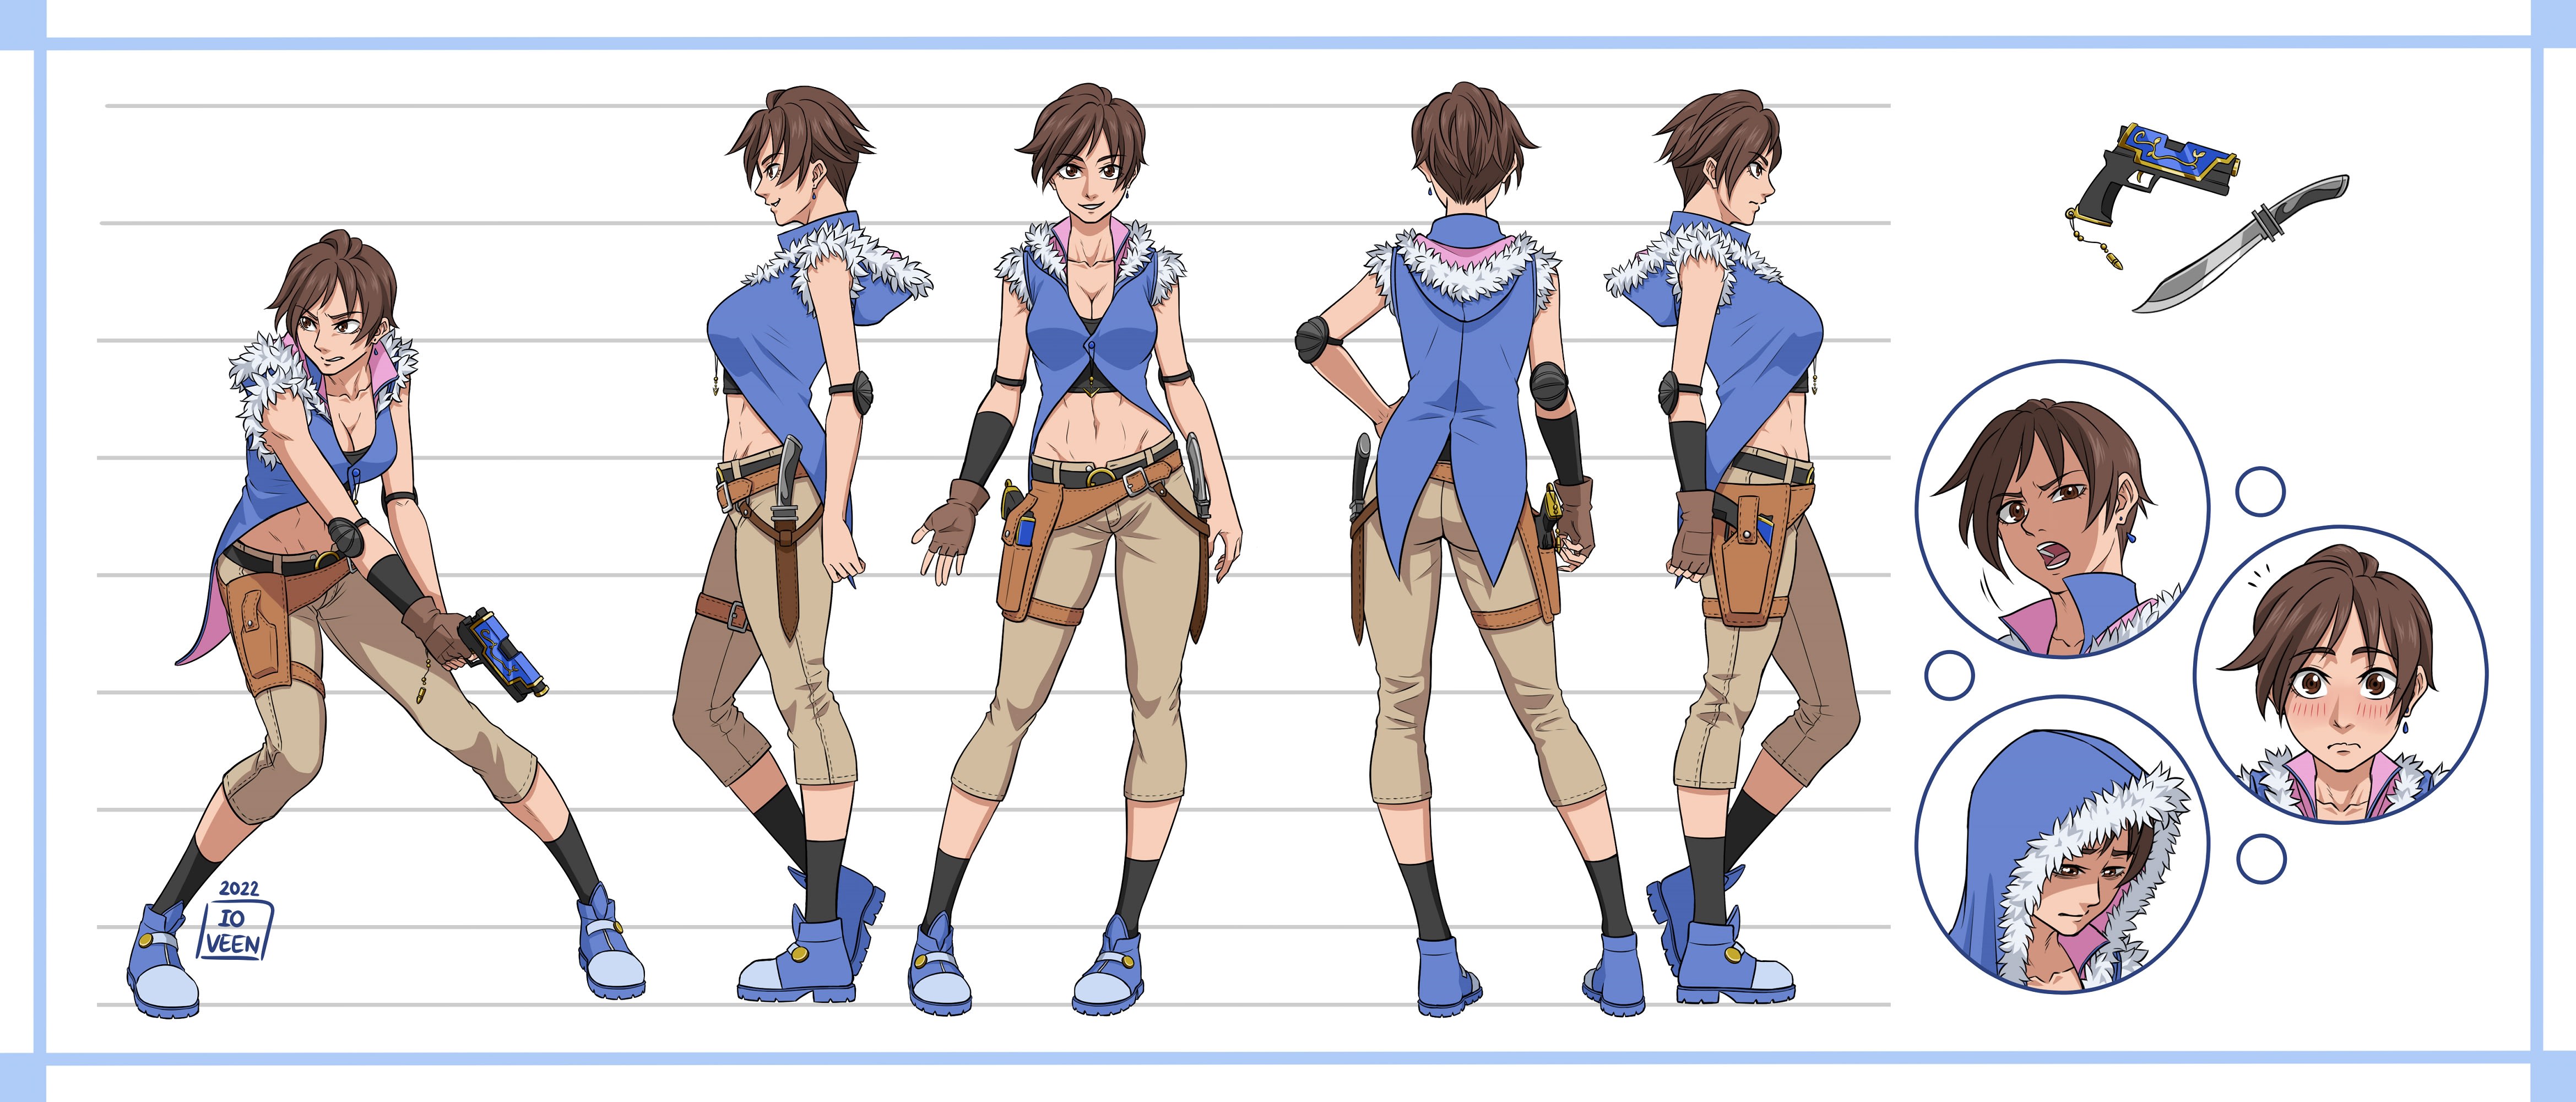 prompthunt: anime girl character sheet, mmotpg outfit, fantasy